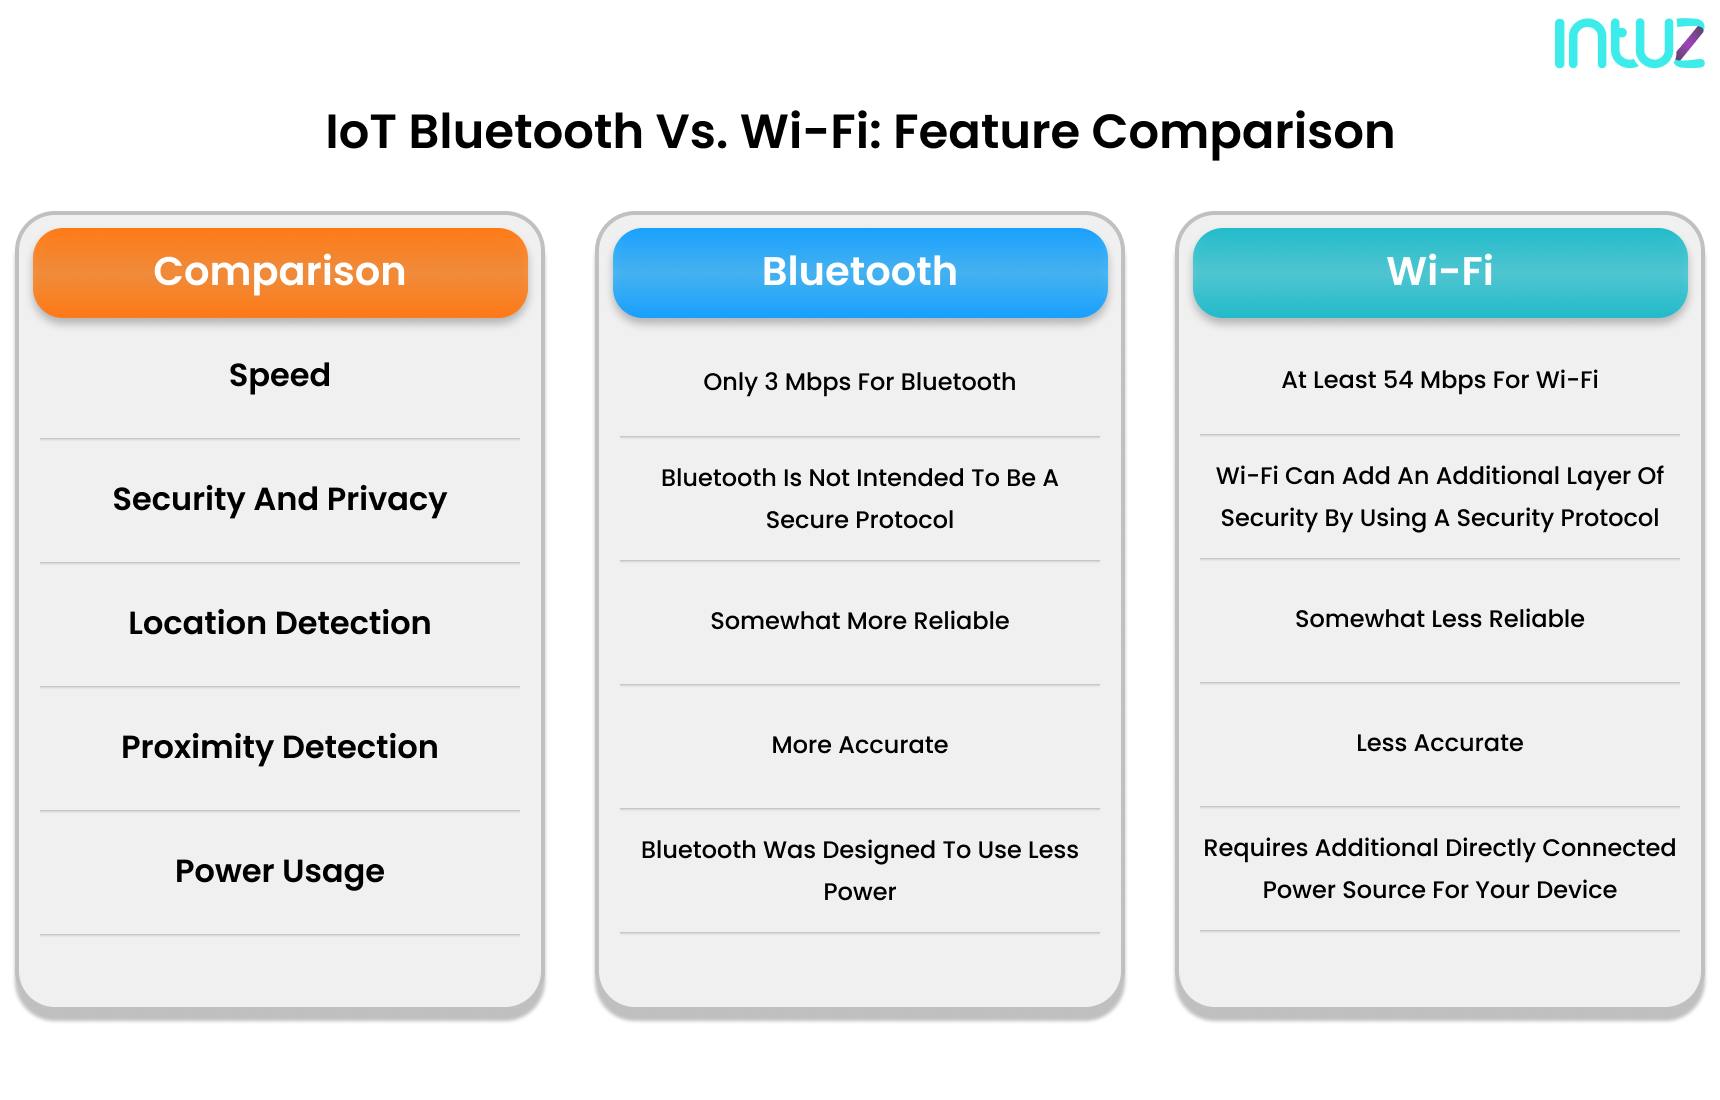 Bluetooth vs. WiFi: Which is a Better Connectivity for IoT Development?